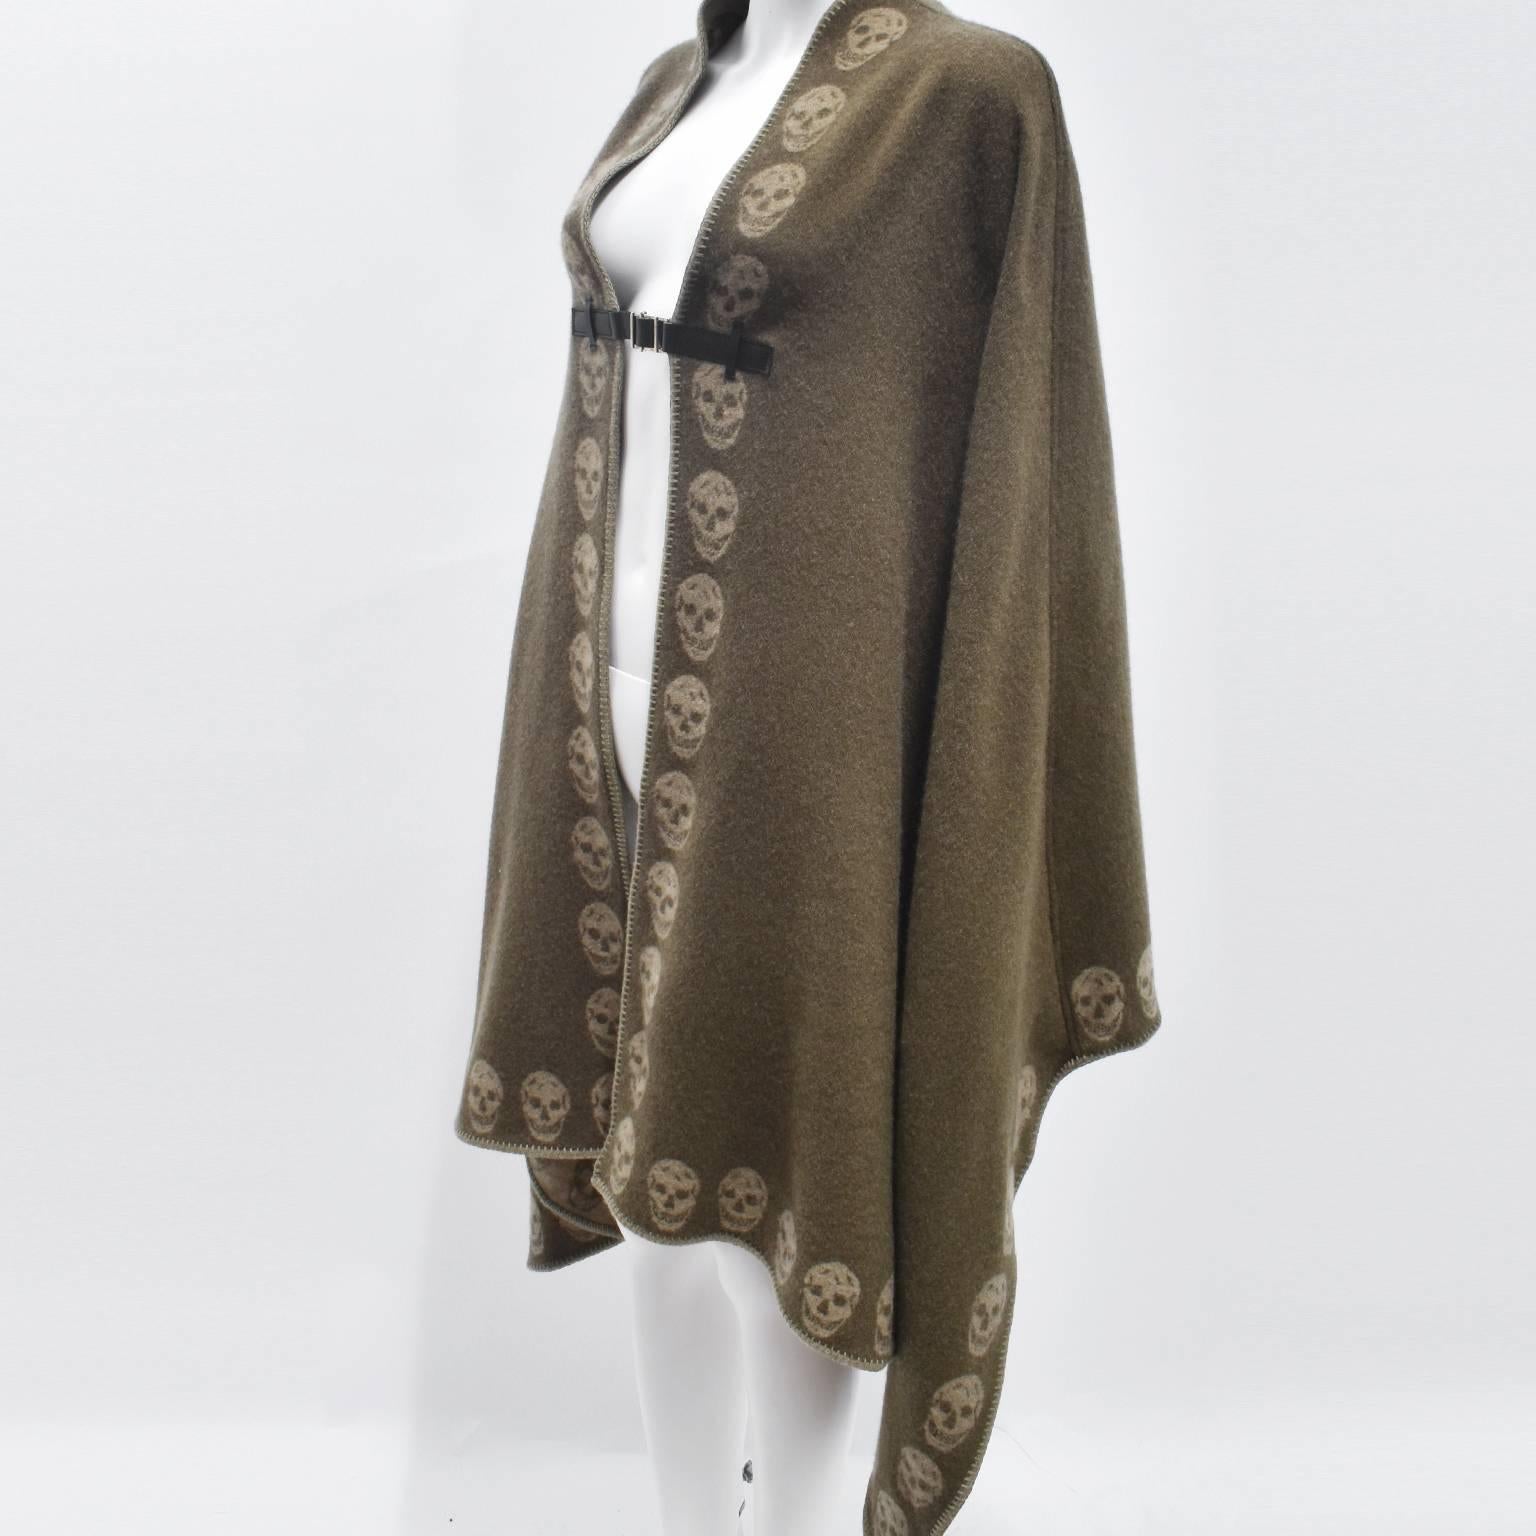 A beautiful and cosy khaki cashmere blanket poncho from Alexander McQueen. The poncho has a simple, one size shape with small curves that echo the shape of the shoulders. The intarsia knit is made from 100% cashmere in a khaki colour with McQueen’s